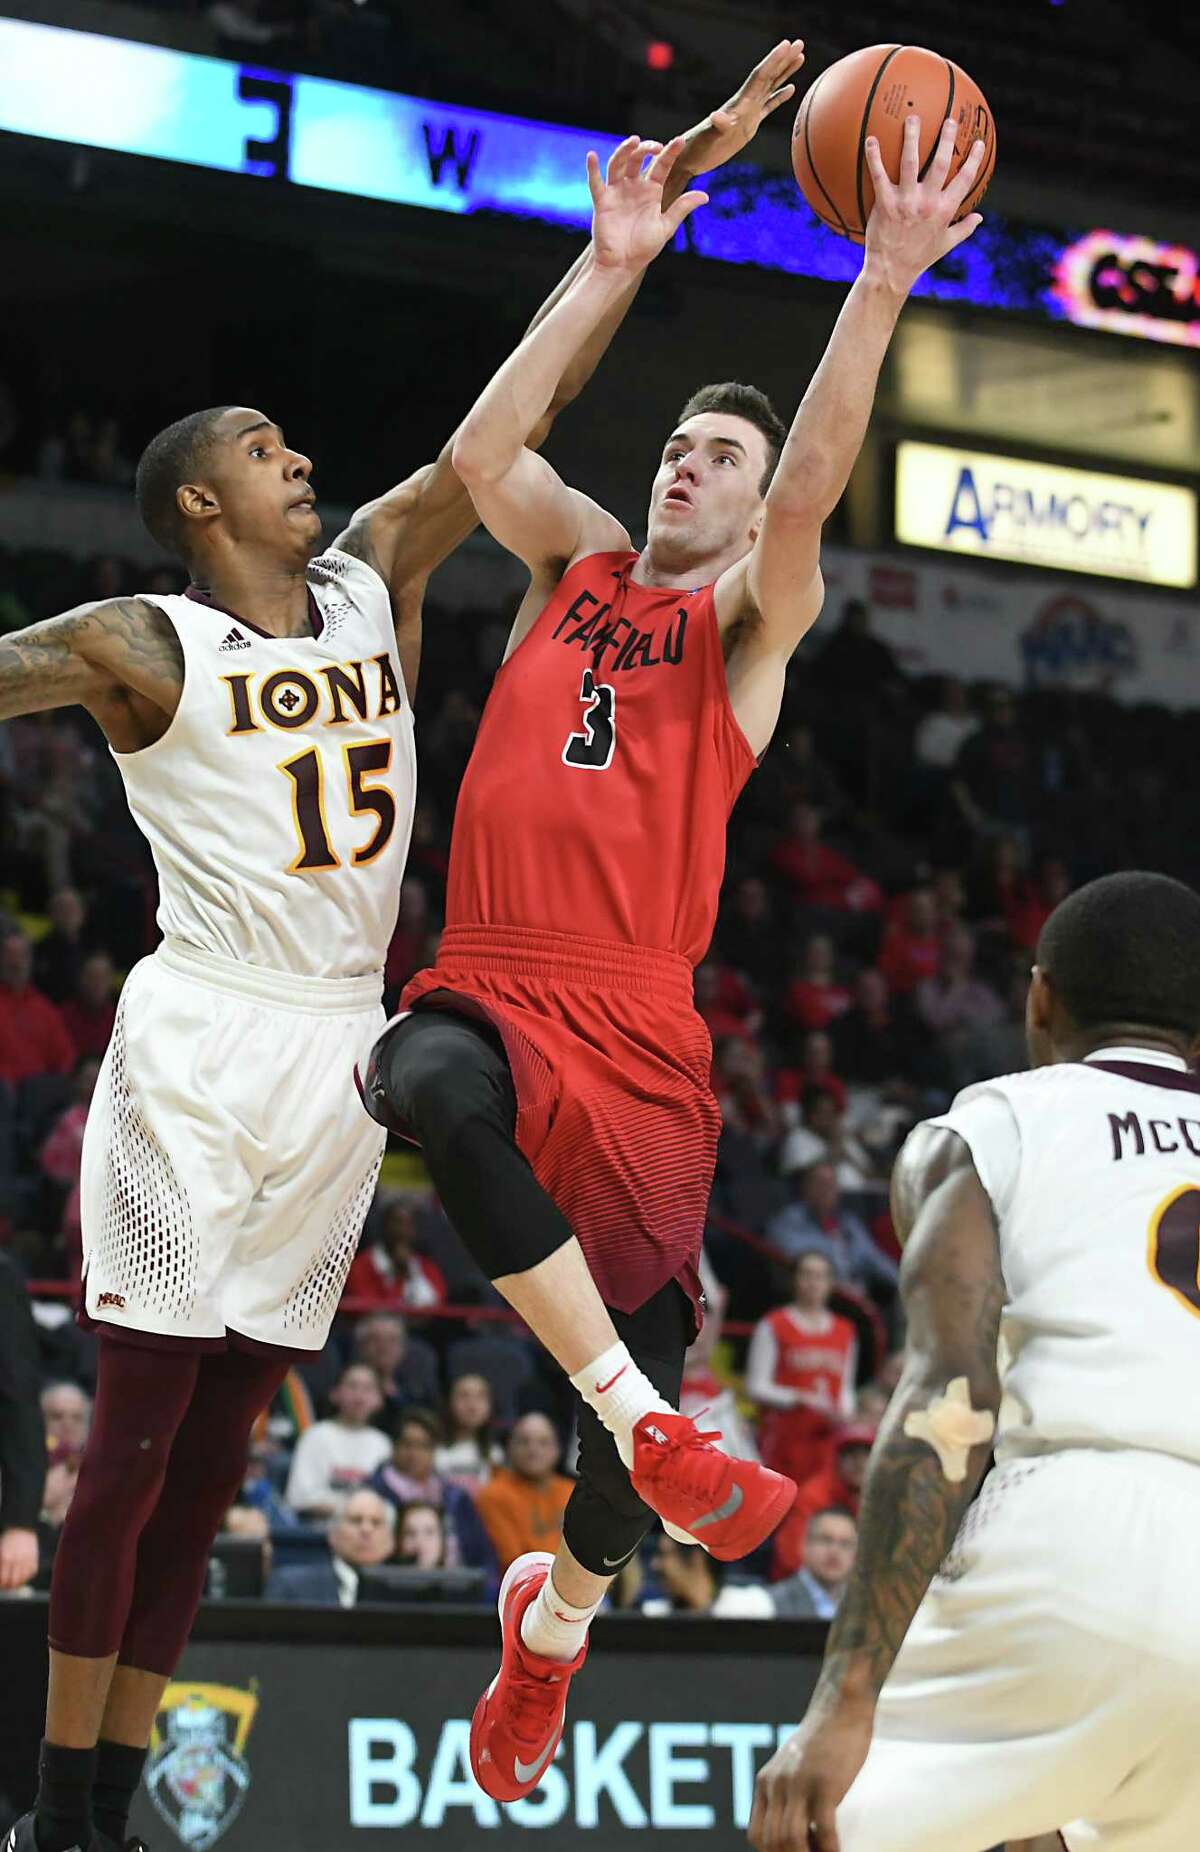 Fairfield's Tyler Nelson drives to the net guarded by Iona's Deyshonee Much in the Metro Atlantic Athletic Conference Tournament's championship game at the Times Union Center on Monday, March 5, 2018 in Albany N.Y. (Lori Van Buren/Times Union)